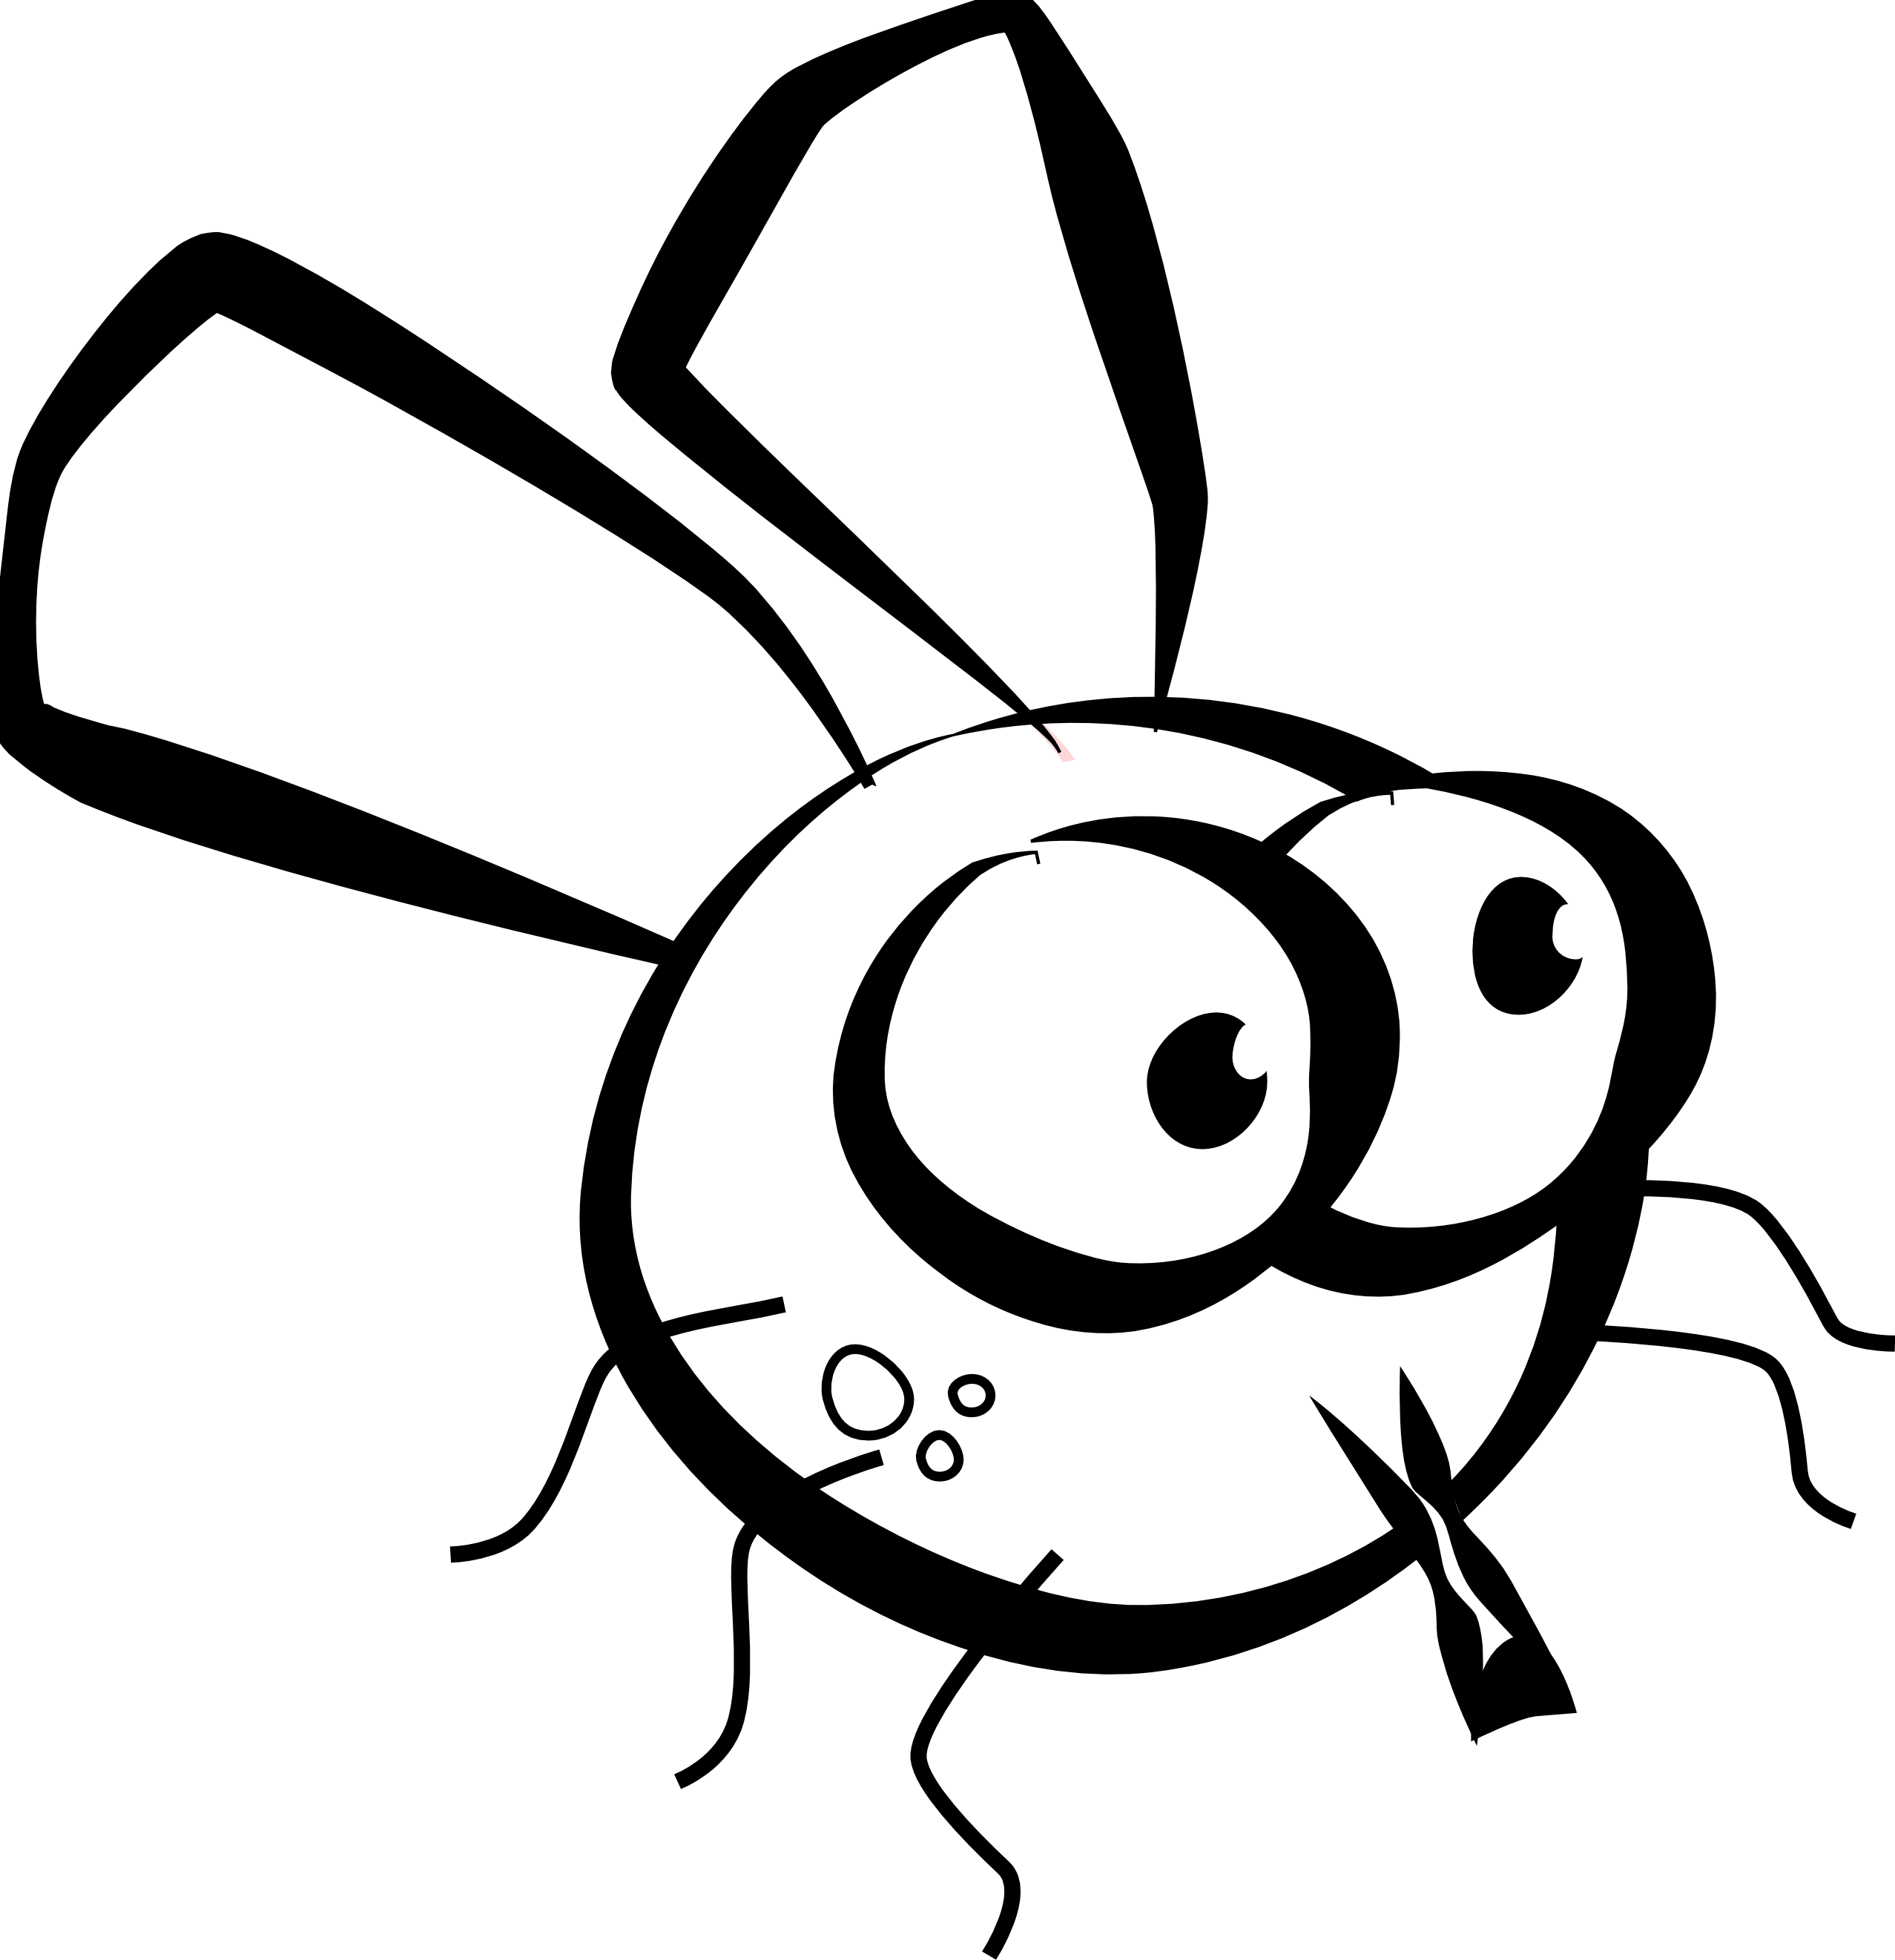 clipart of a fly - photo #26